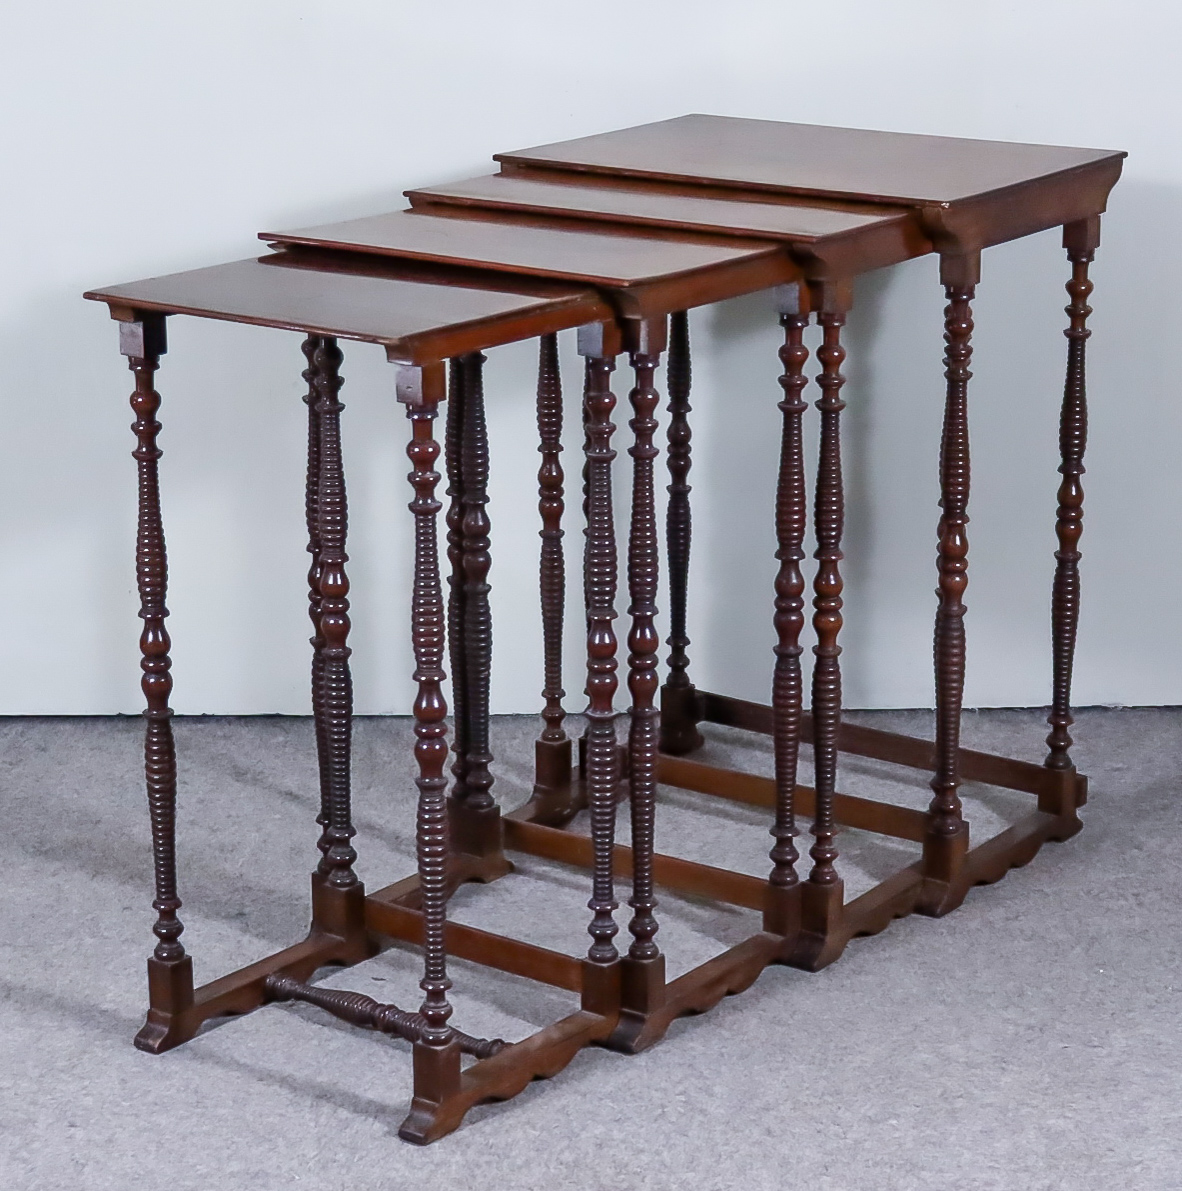 A Nest of Four 19th Century Mahogany Rectangular Occasional Tables, on bobbin turned supports and